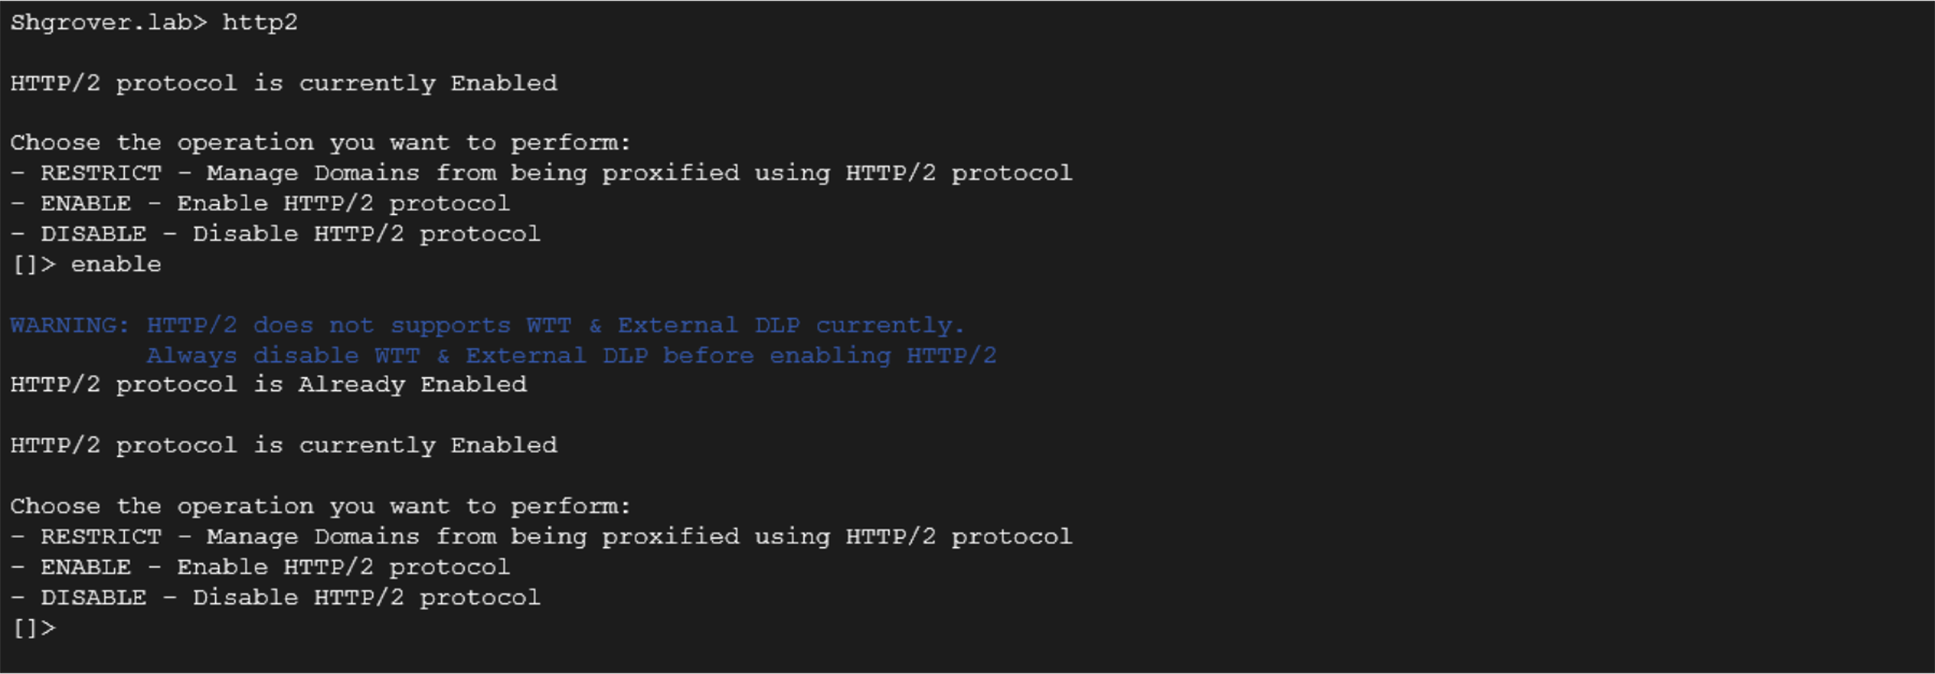 Disabled Features with HTTP 2 Enabled